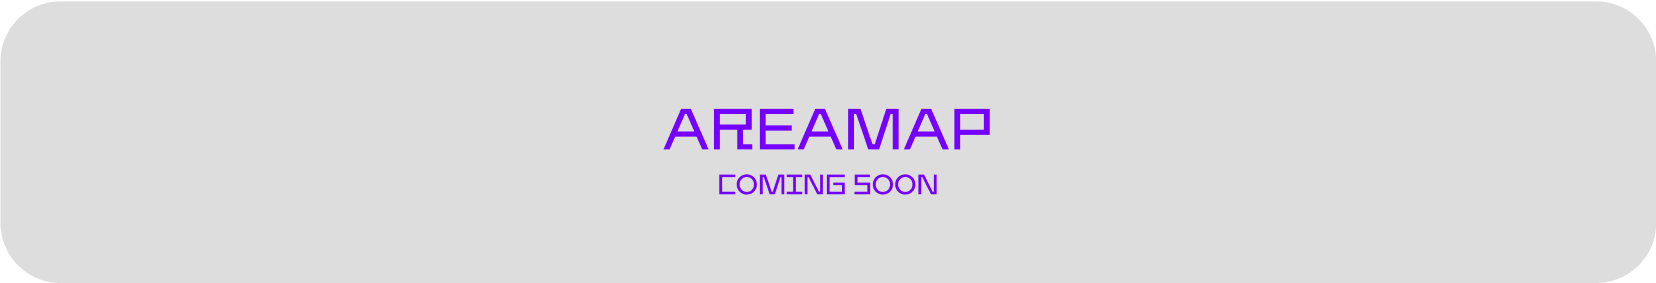 AREAMAP COMING SOON